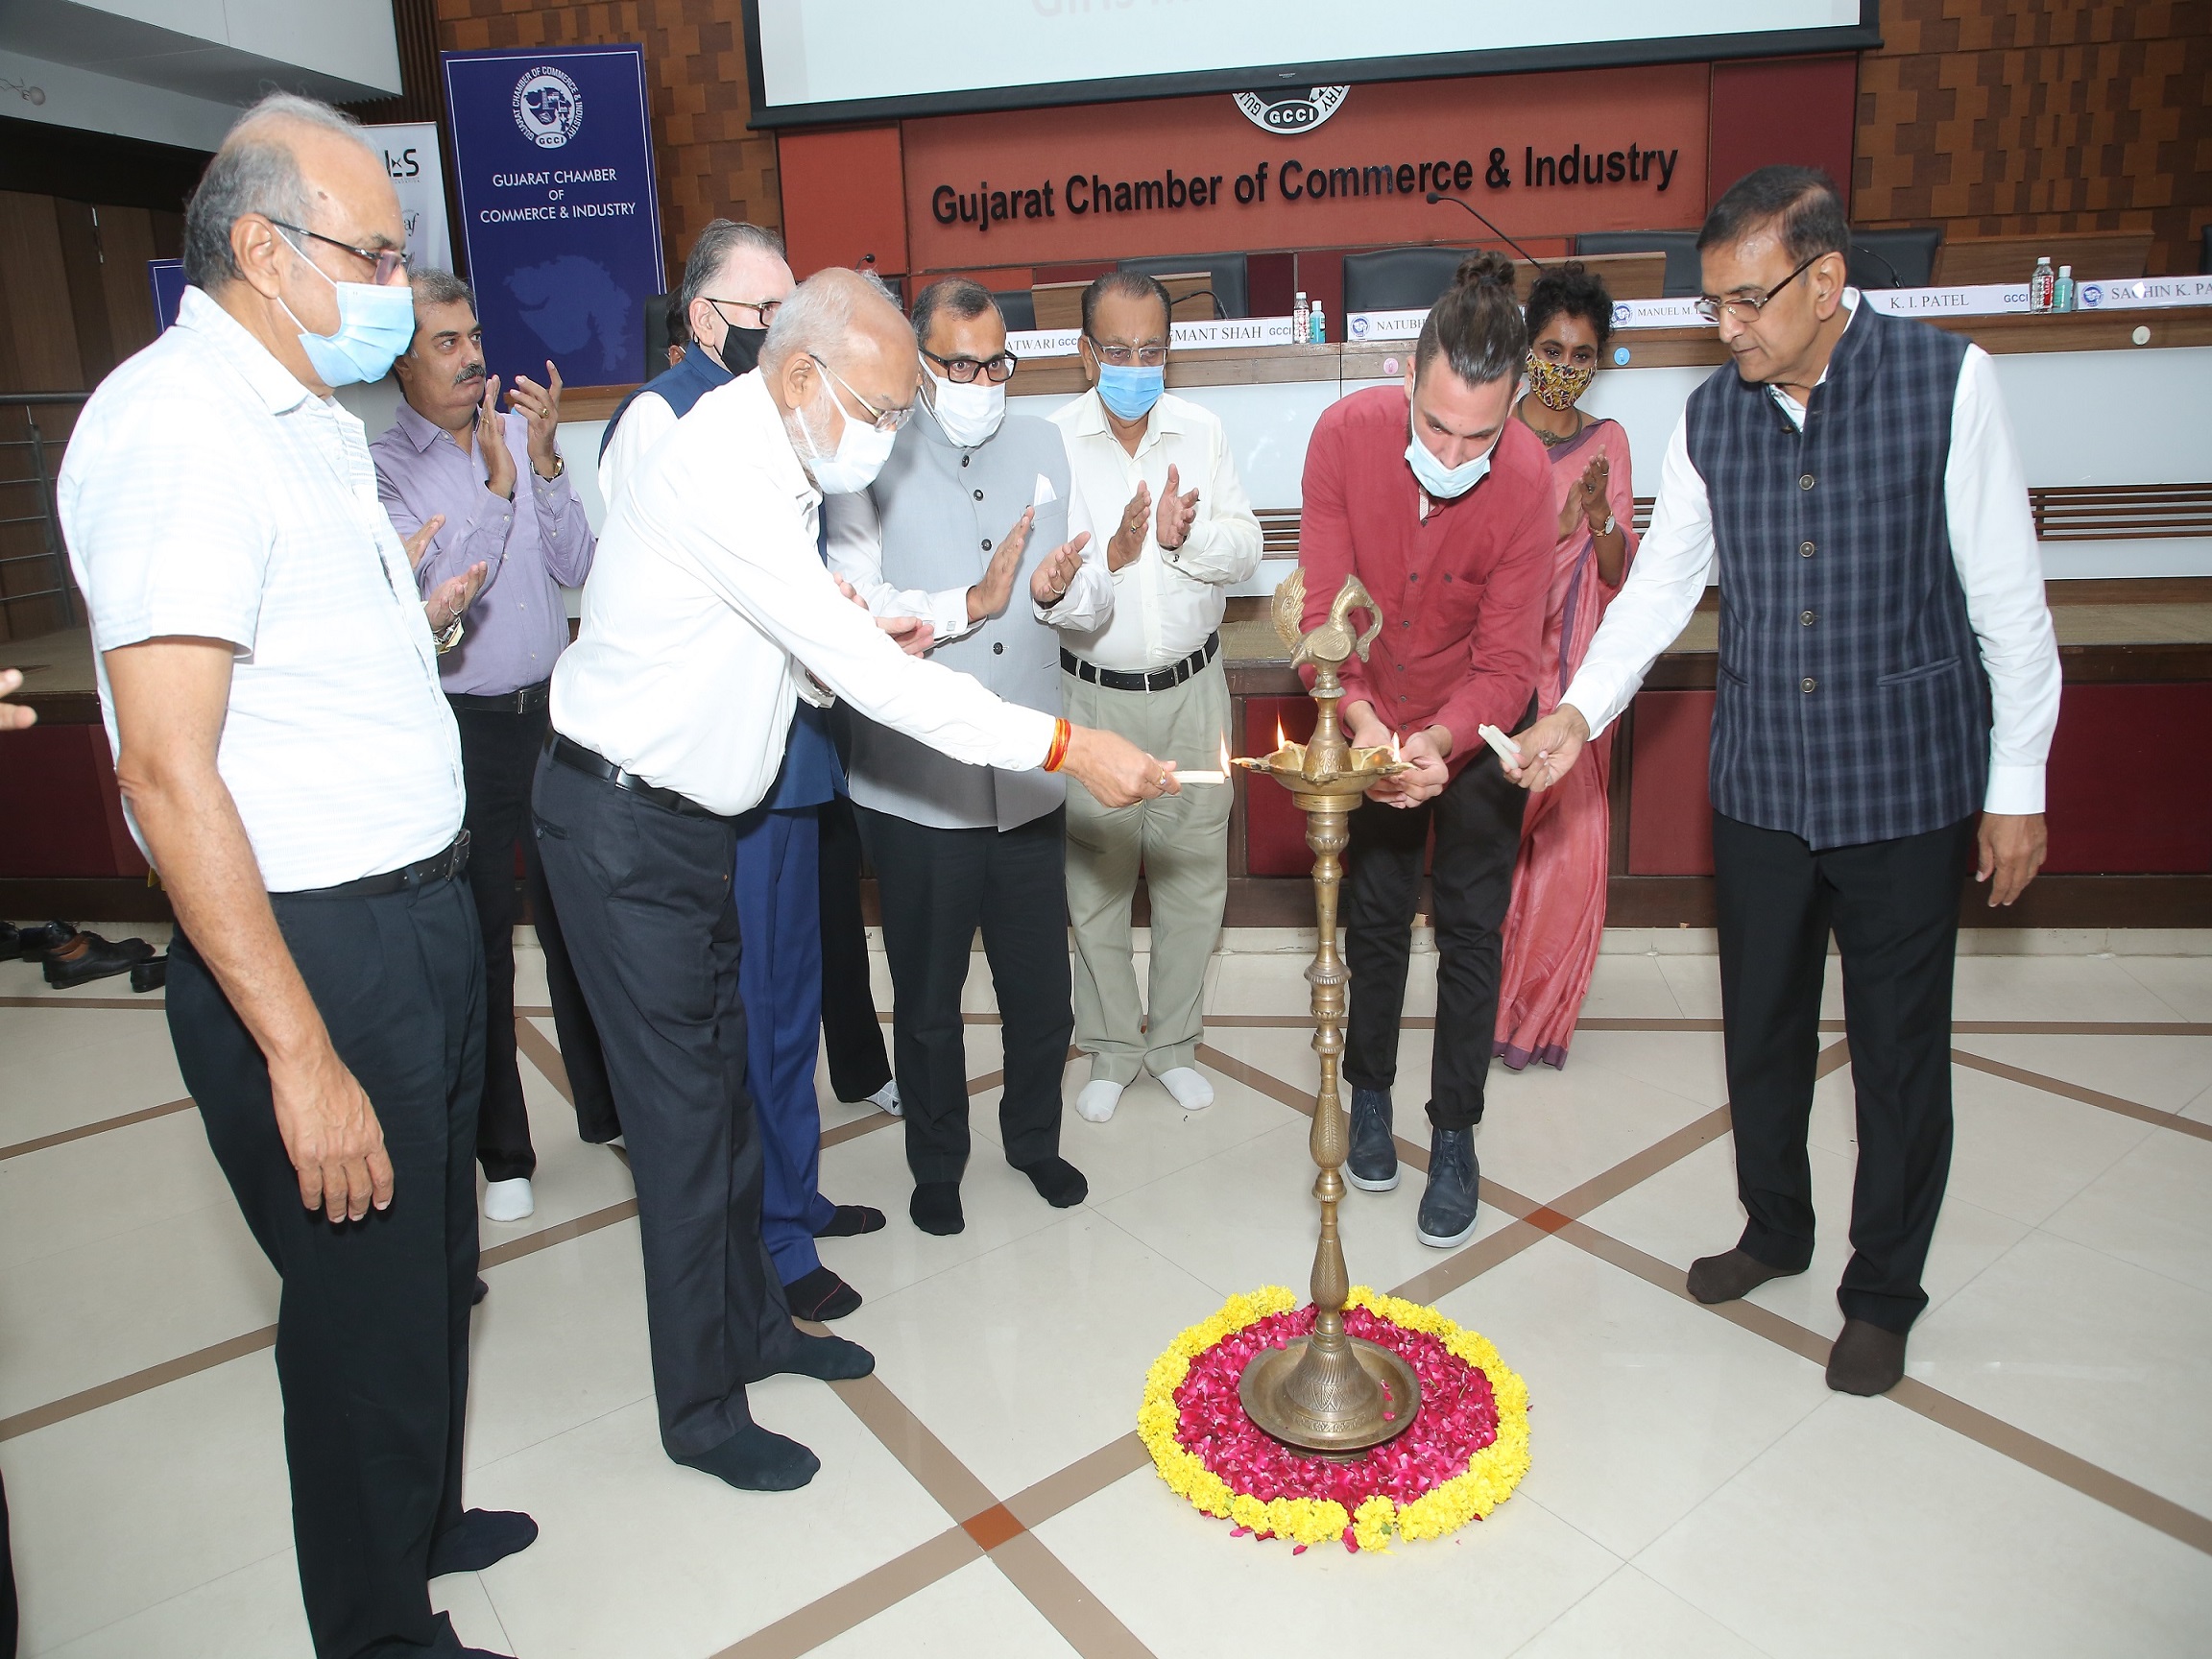 Project launching Ceremony & Bhoomi Poojan of “Girls Innovation Center”